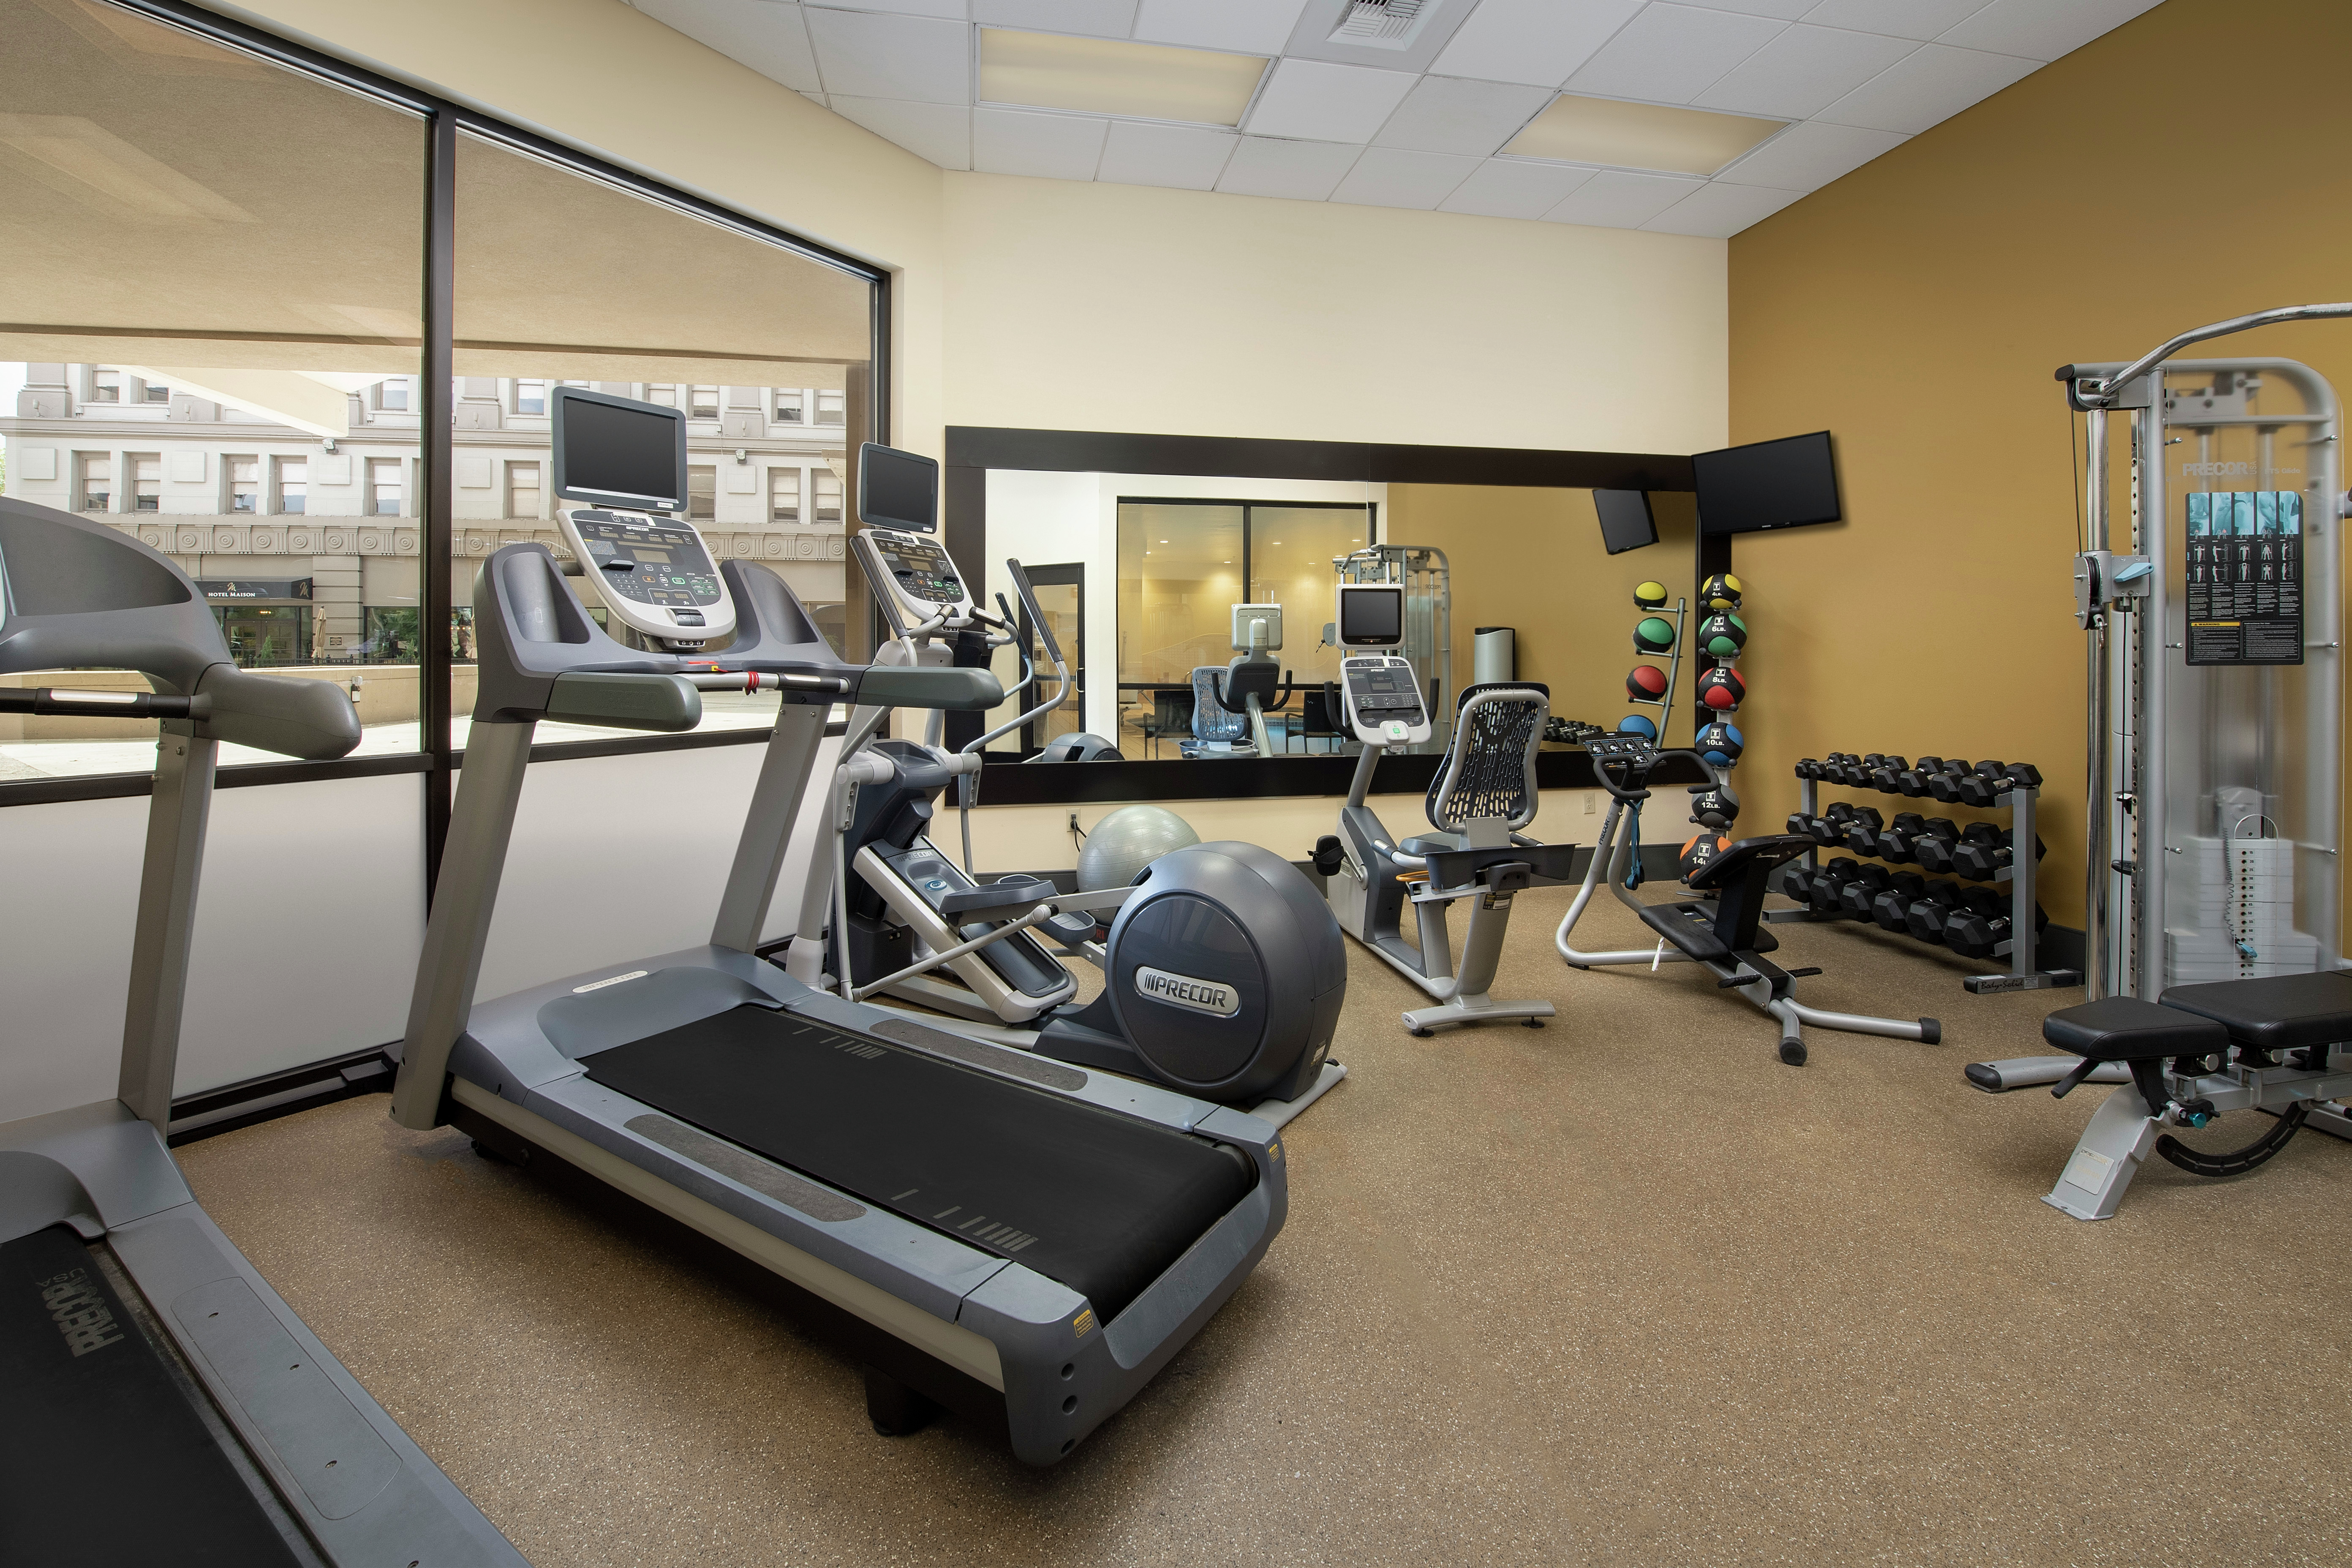 Fitness Center with Treadmills, Cross-Trainer, Cycle Machine and Weight Machine